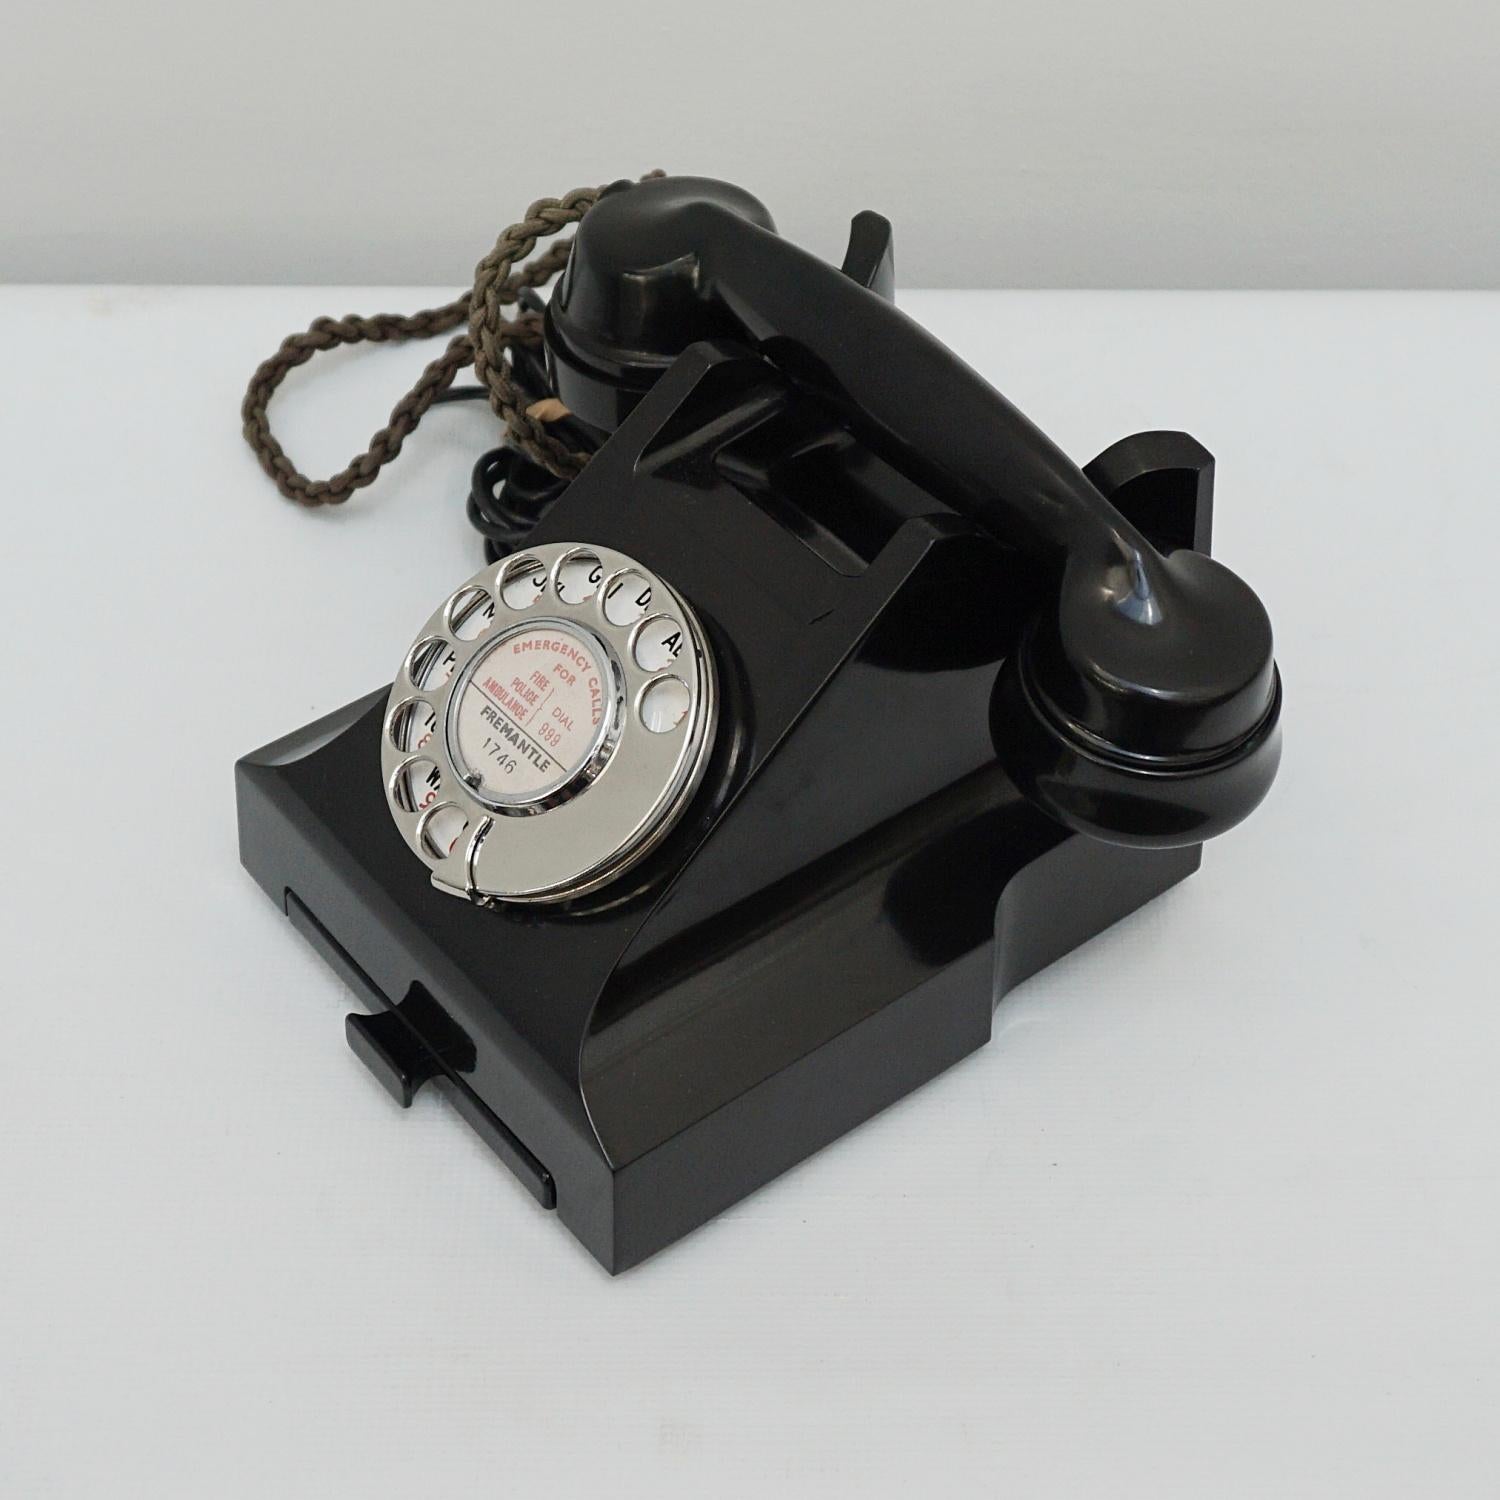 An original GPO model 332L Telephone. Black bakelite with integral drawer and braided handset cord. Registered number to face.

Dimensions: H 15cm, W 20cm, D 16cm

Origin: English

Date: Circa 1950

Item No: F1703227

All of our telephones